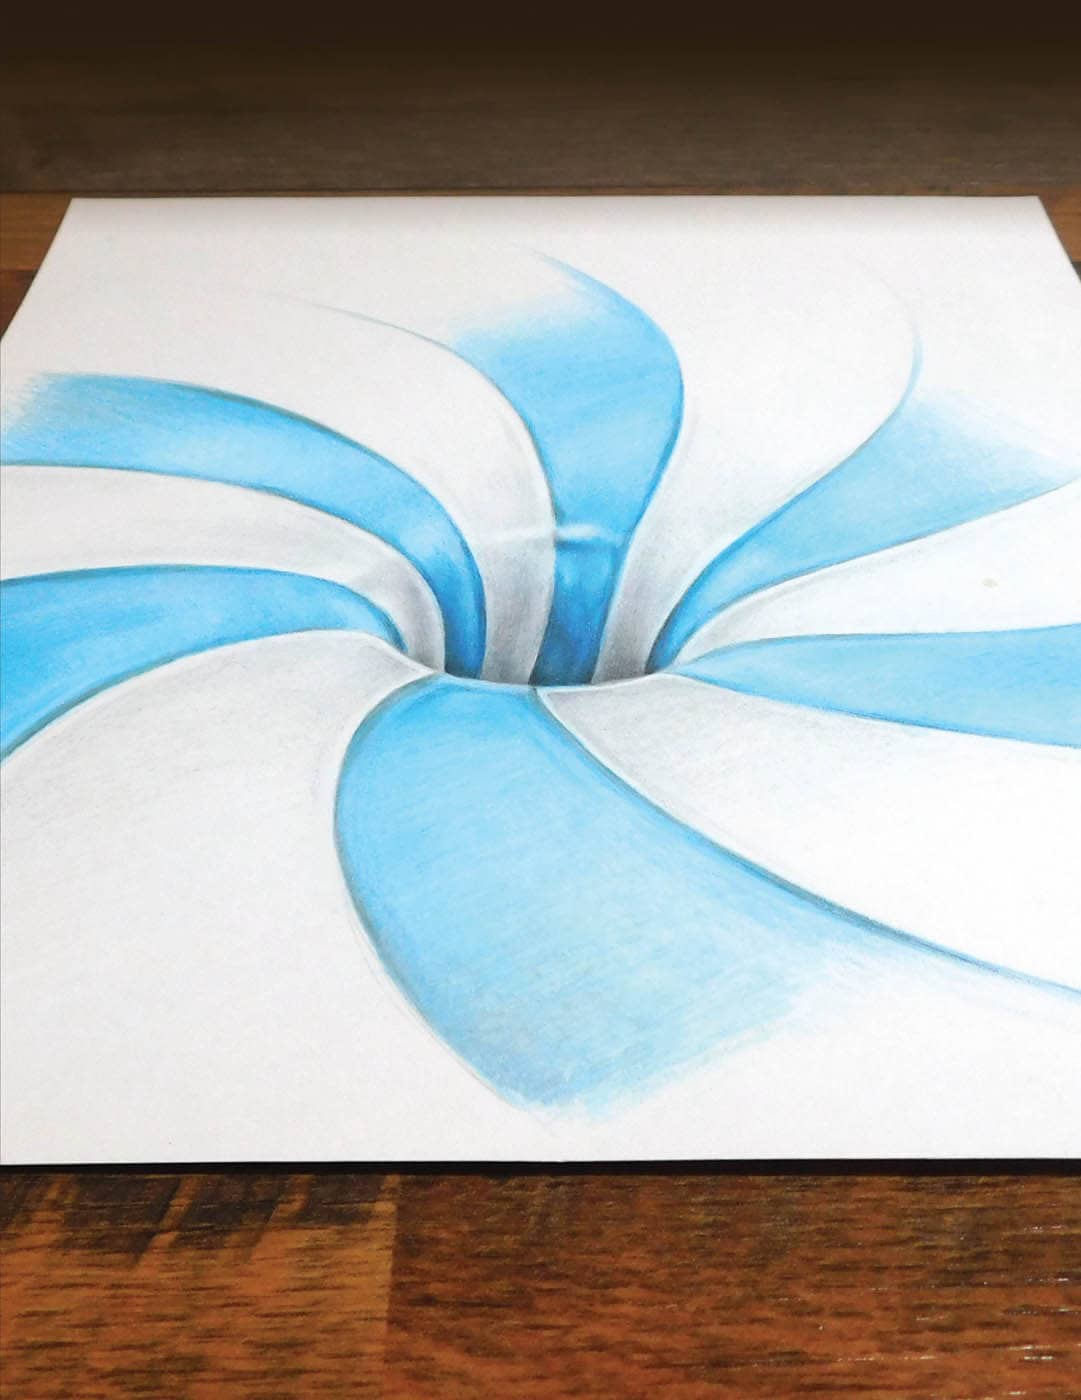 3 Amazing 3D Drawings On Paper, How To Draw 3D Art On Paper